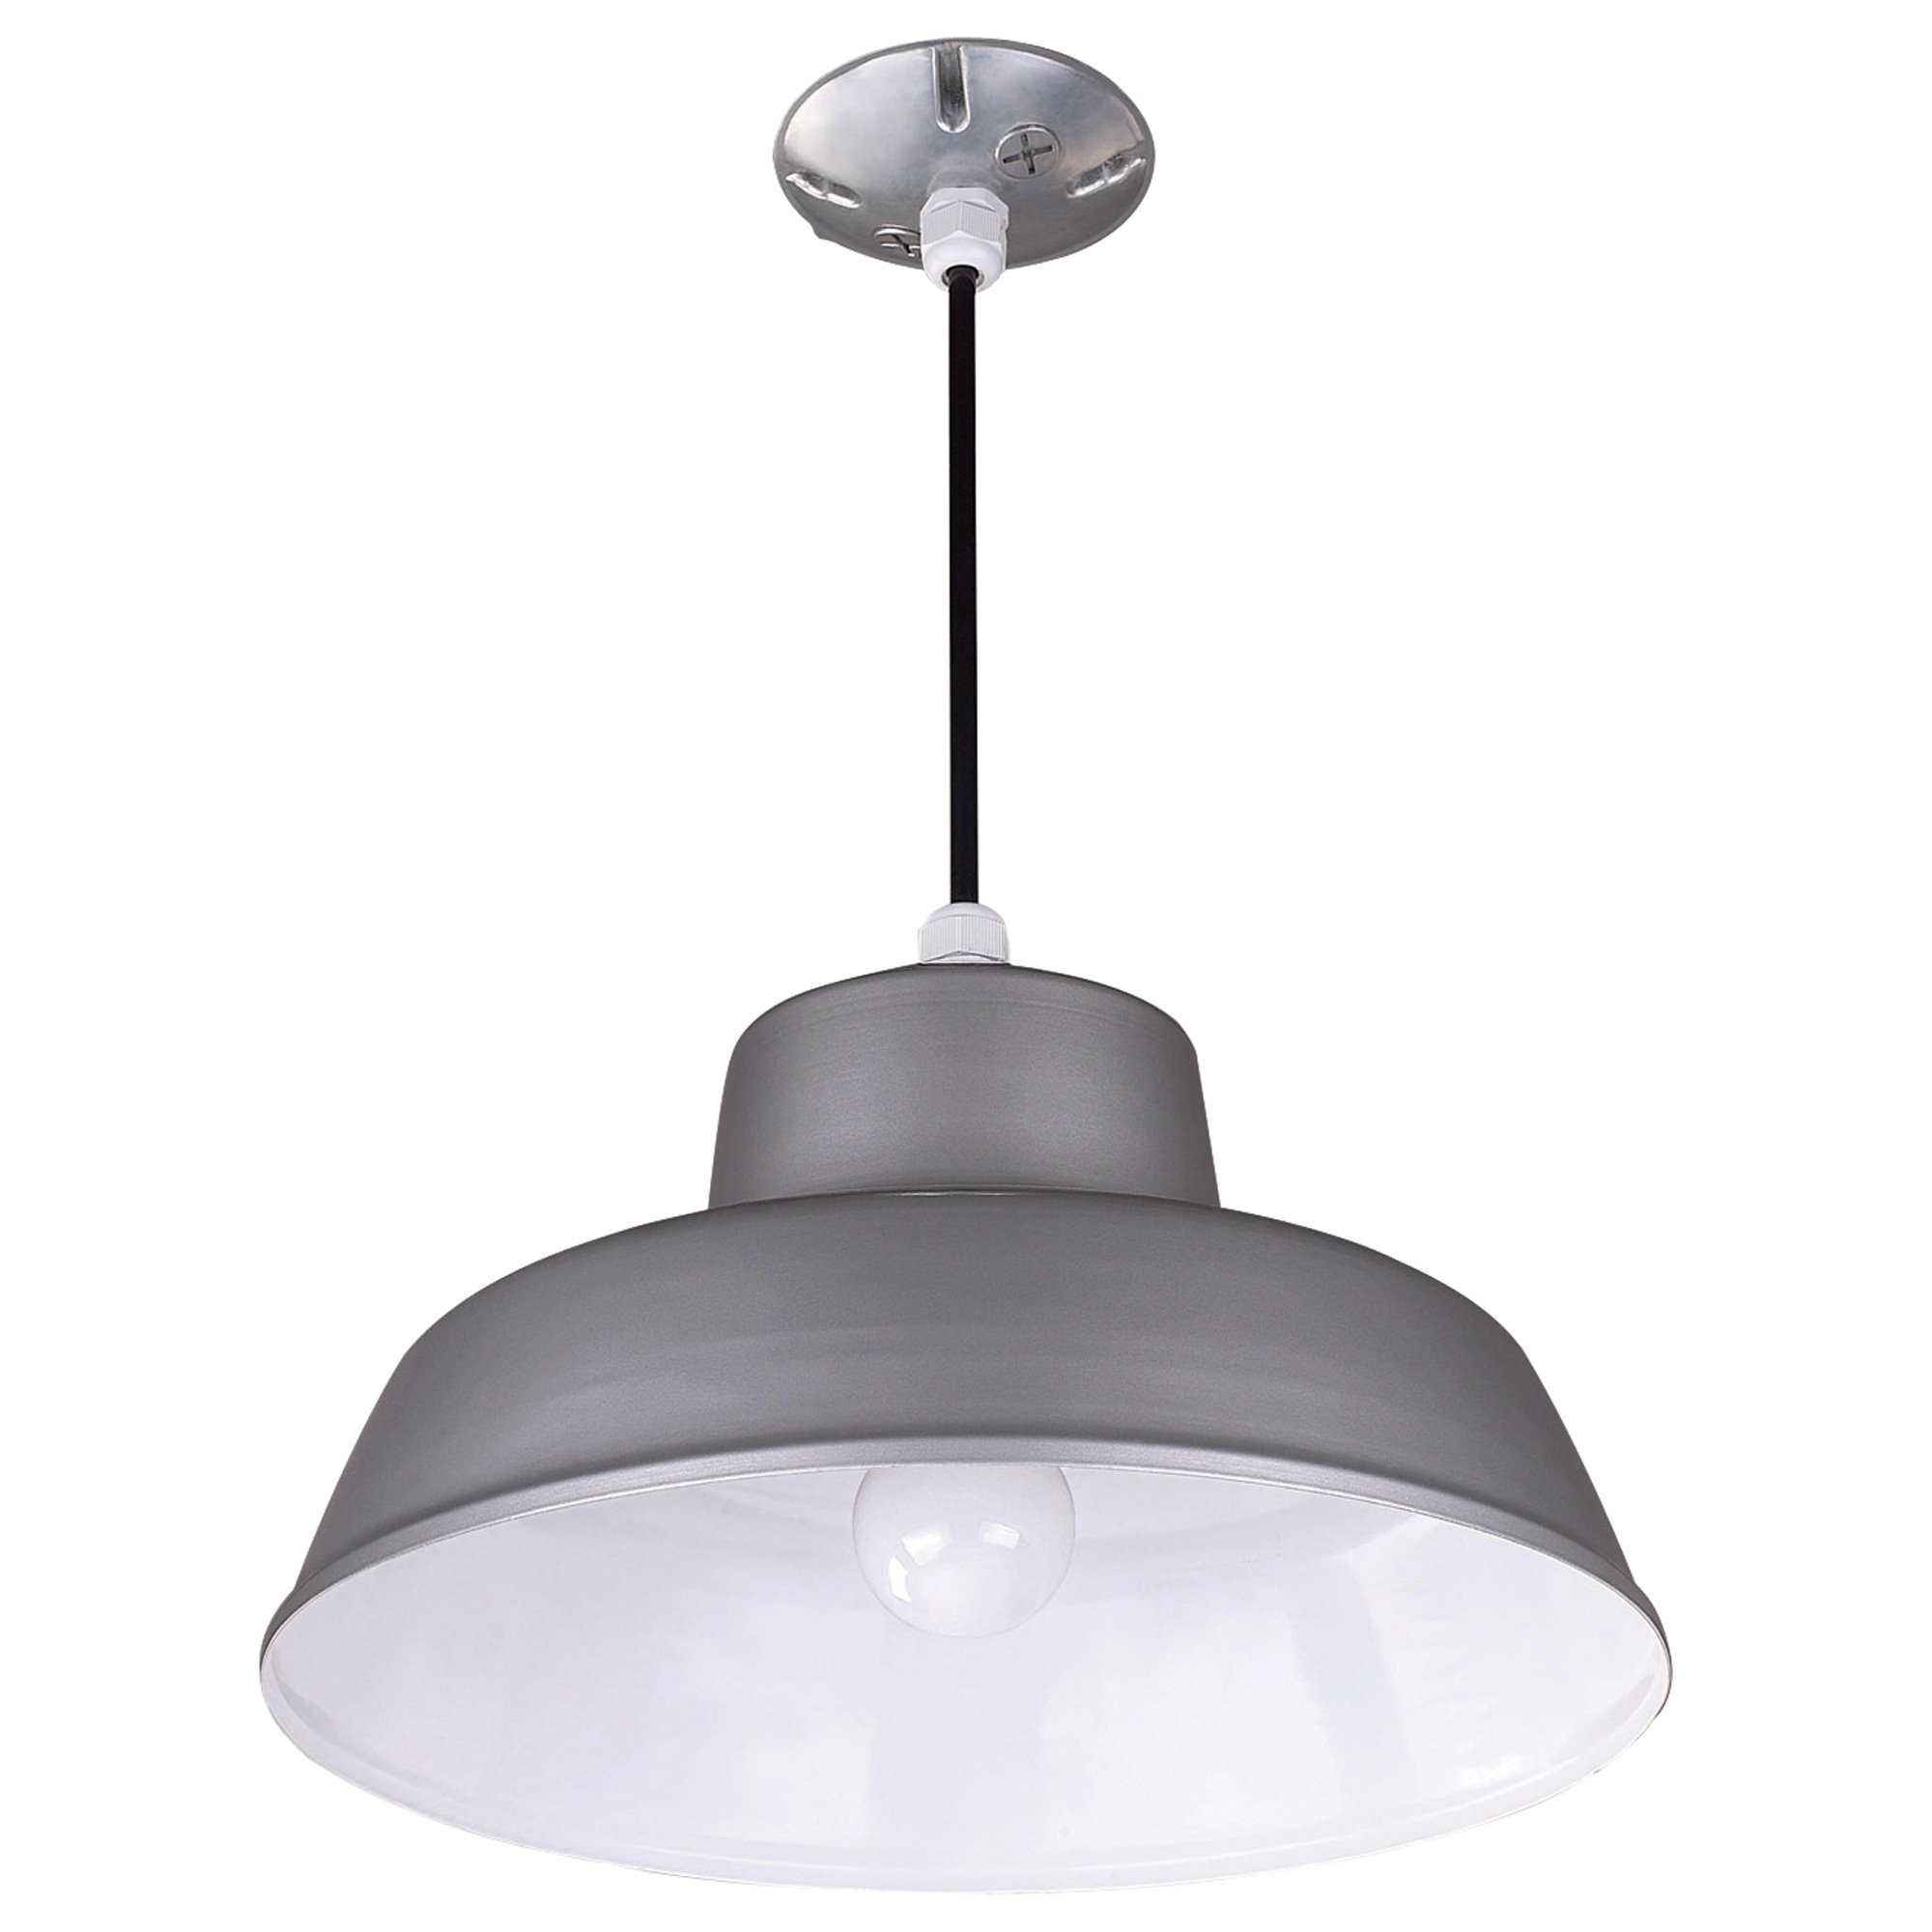 Permalink to Hang Light Fixture For Suspended Ceiling